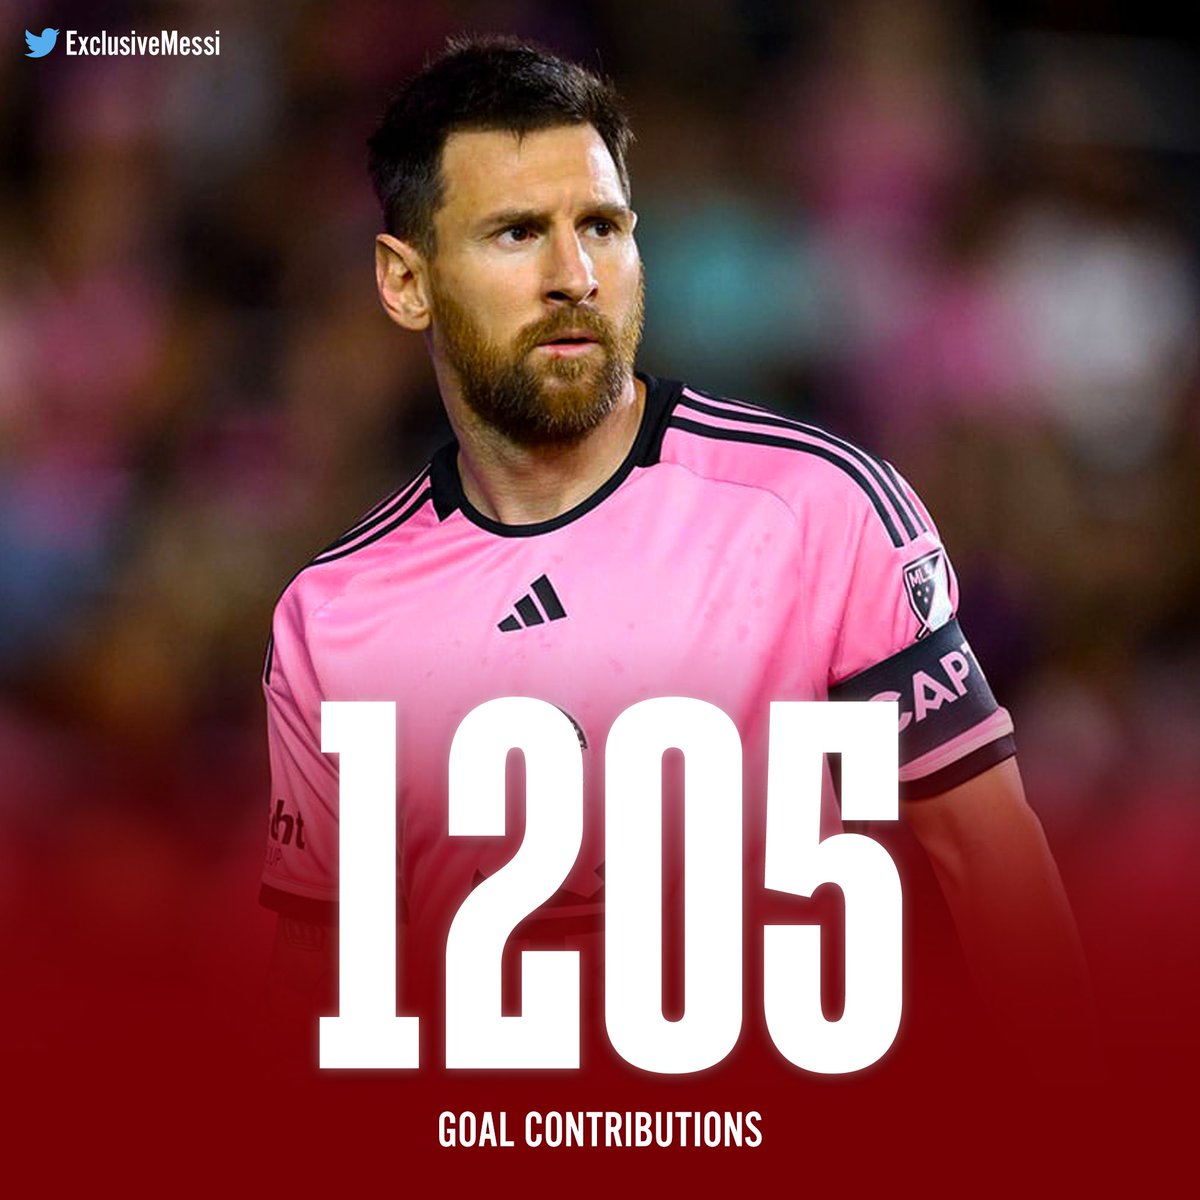 🚨 NEW RECORD Lionel Messi breaks the record for MOST goal contributions in football! Breaking the previous record held by Lionel Messi 🤯 ⚽️ 833 Goals 🅰️ 372 Assists